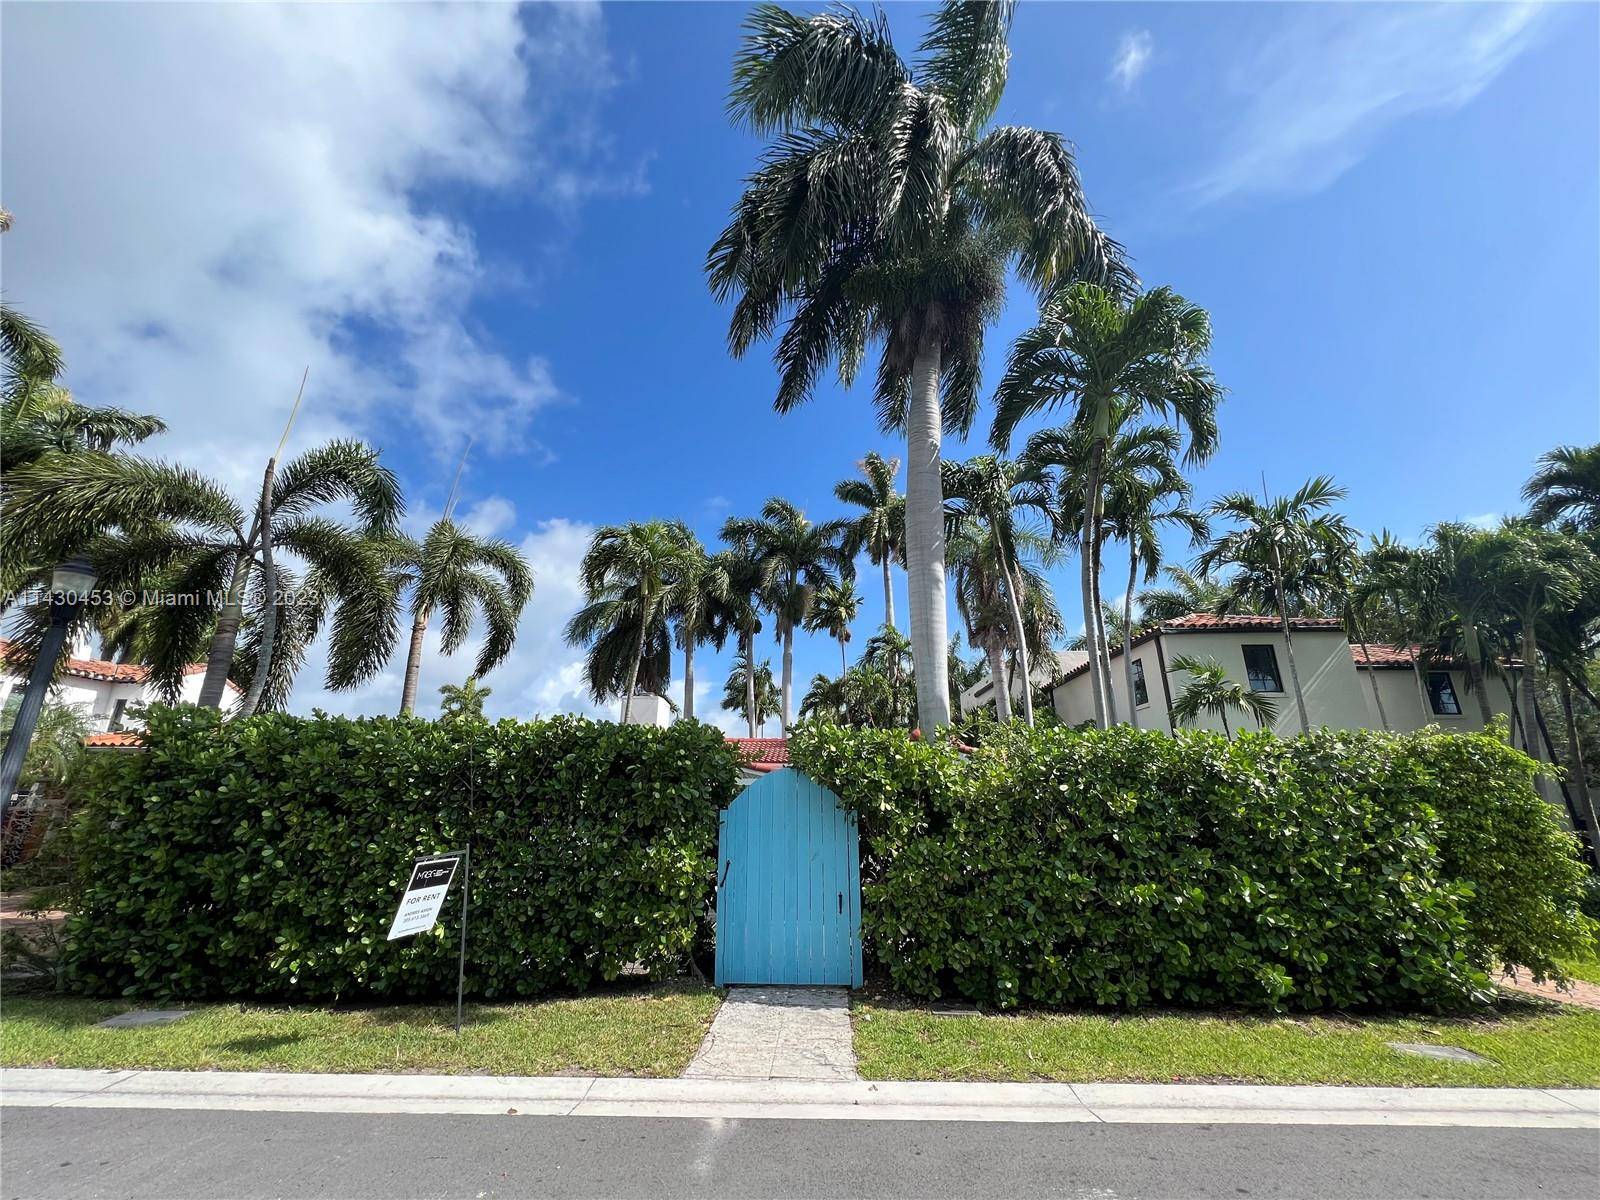 Most affordable house out of all the Gated Island Communities in Miami Beach and the only community with Miami Beach Police at the guard gate.